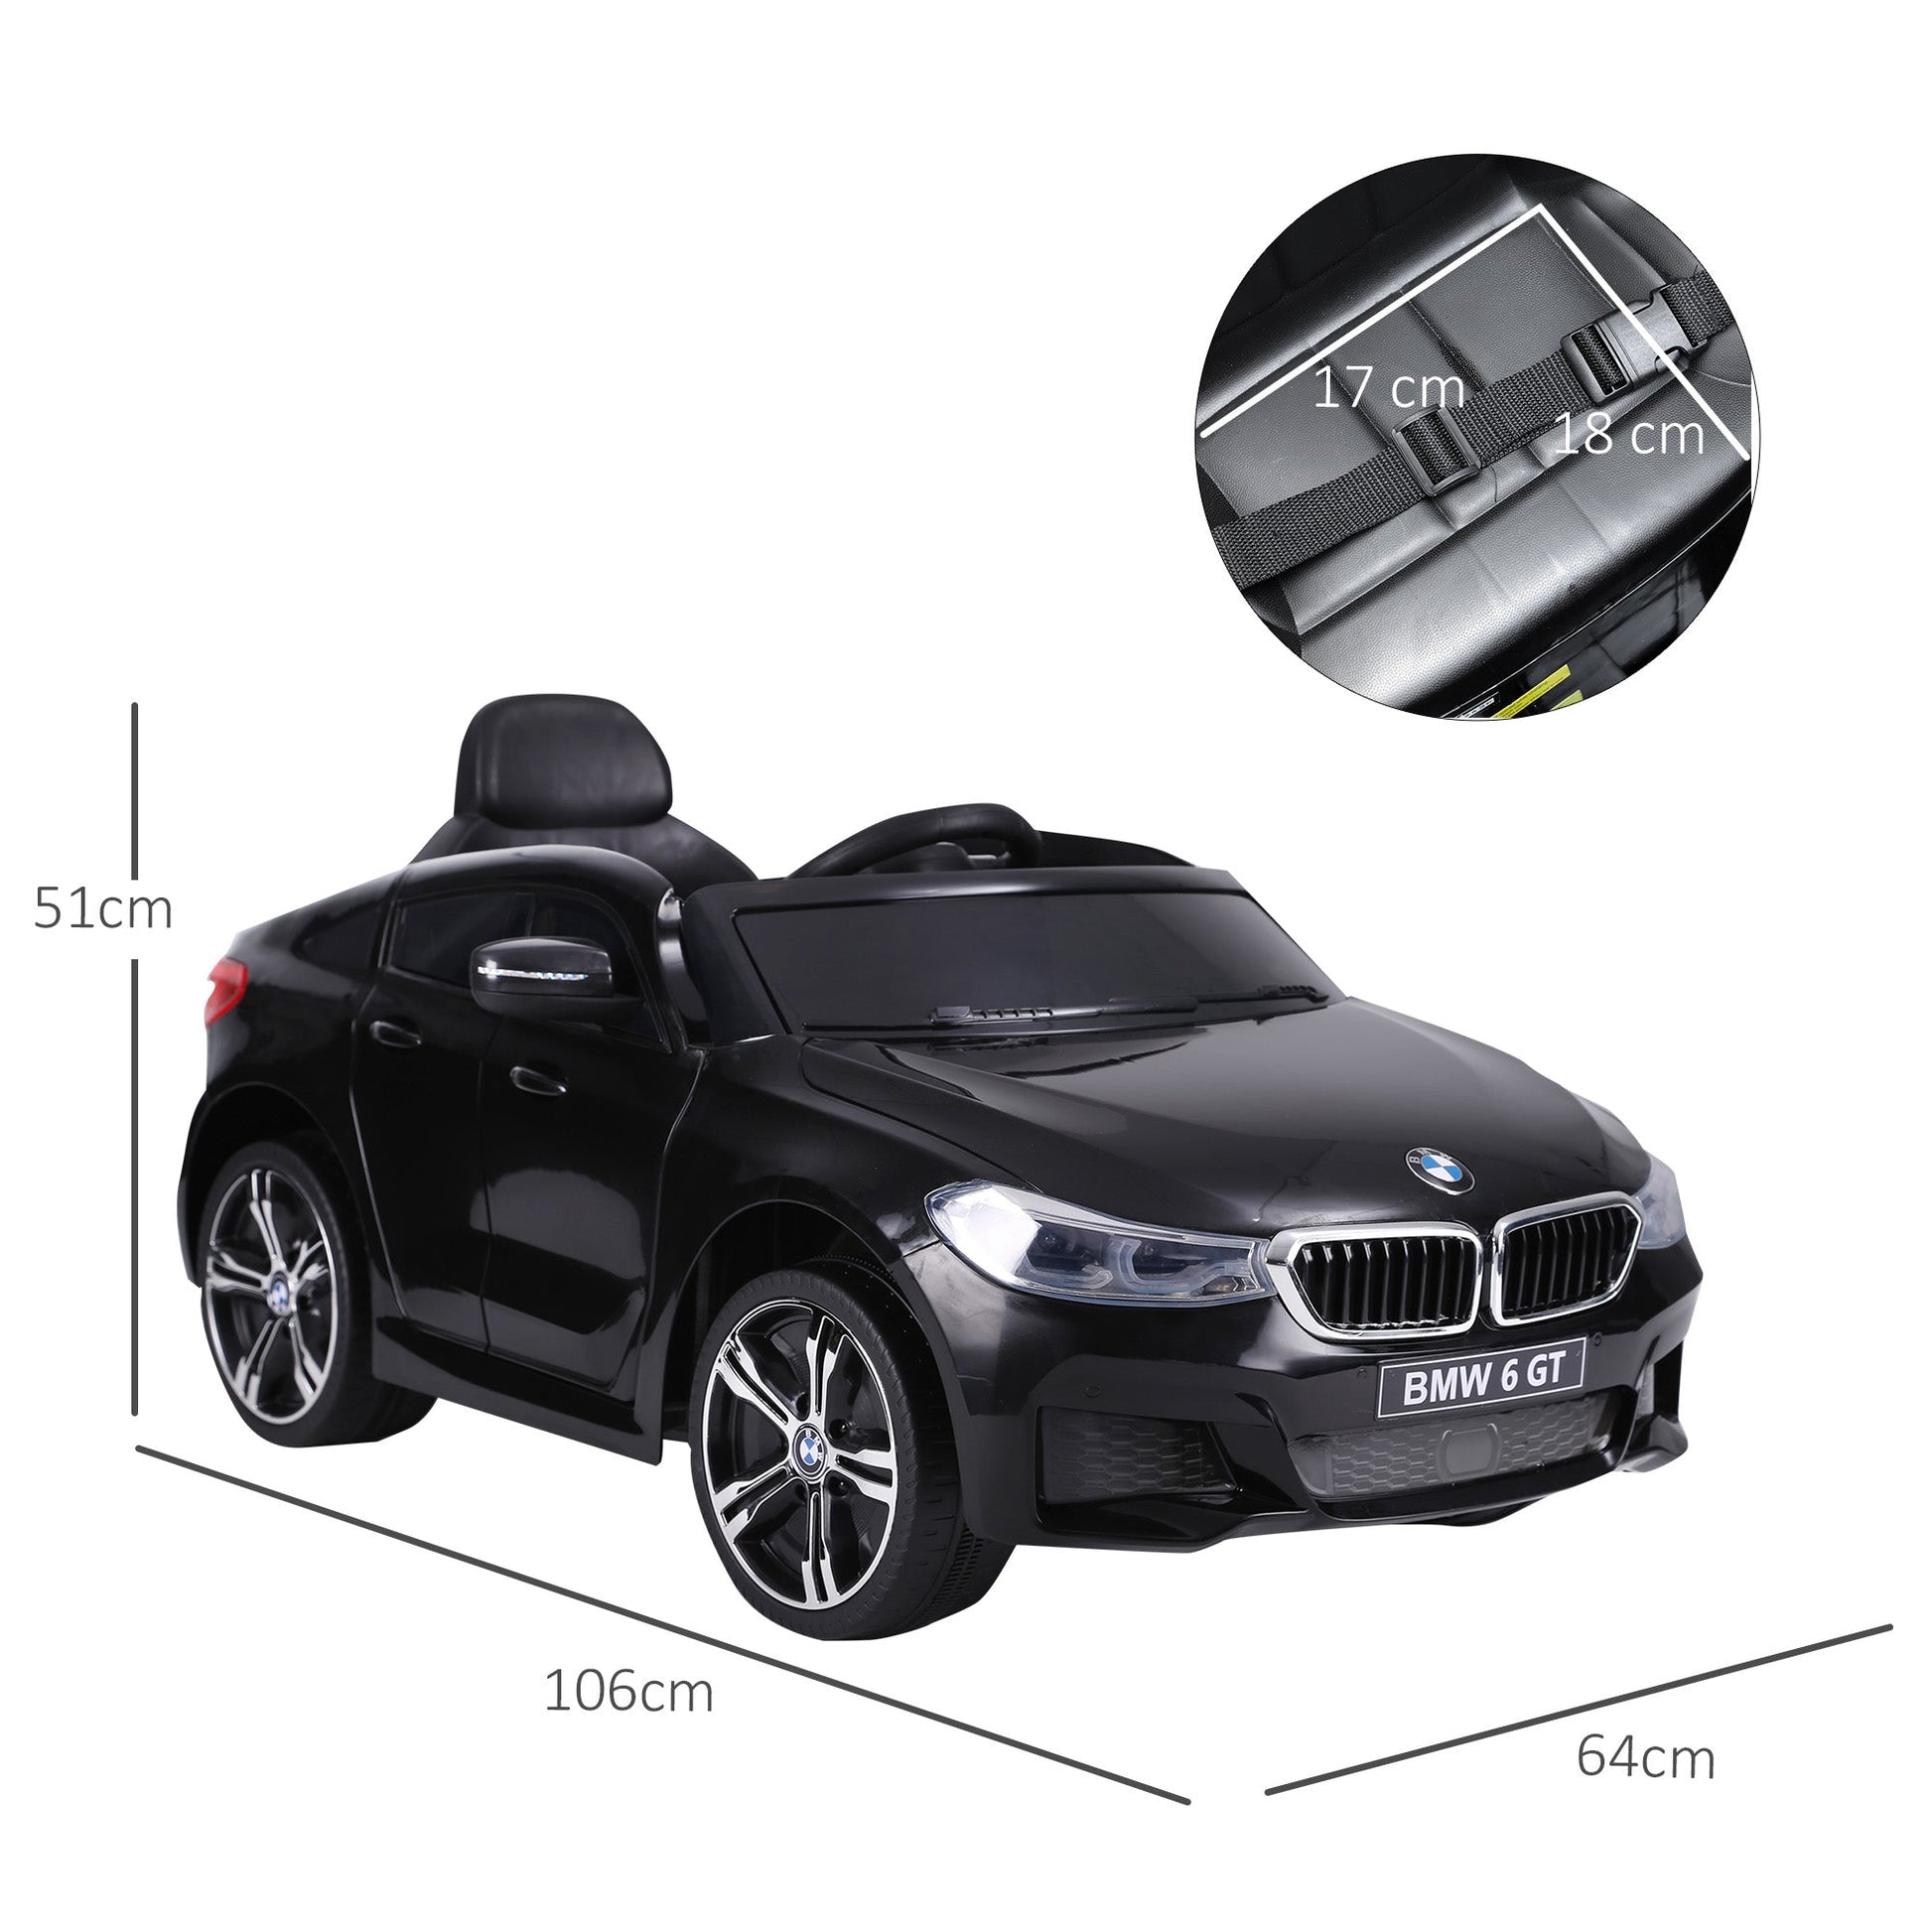 Maplin Plus Licensed BMW 6GT 6V Kids Electric Ride On Car with Remote Control - Black - maplin.co.uk